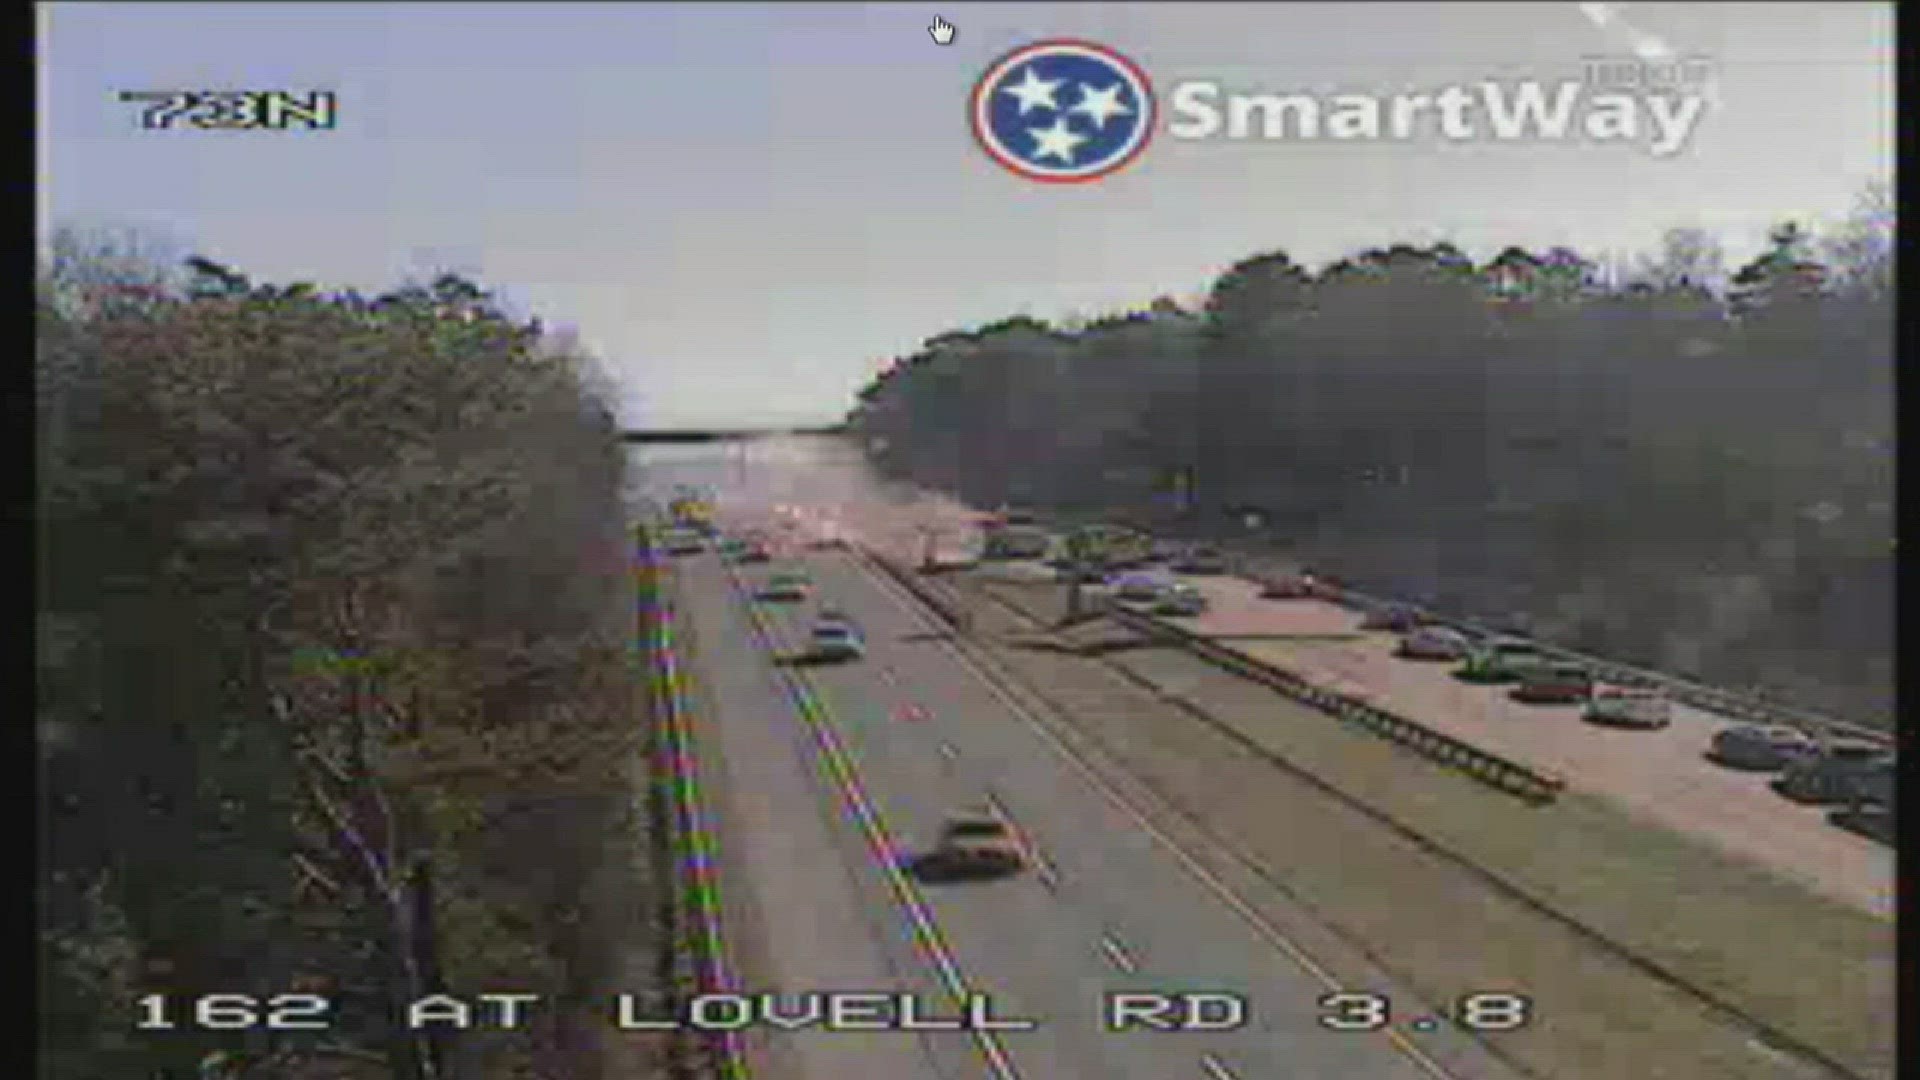 Pellissippi Parkway at Lovell Road has been closed following a multi-vehicle crash on the southbound side.